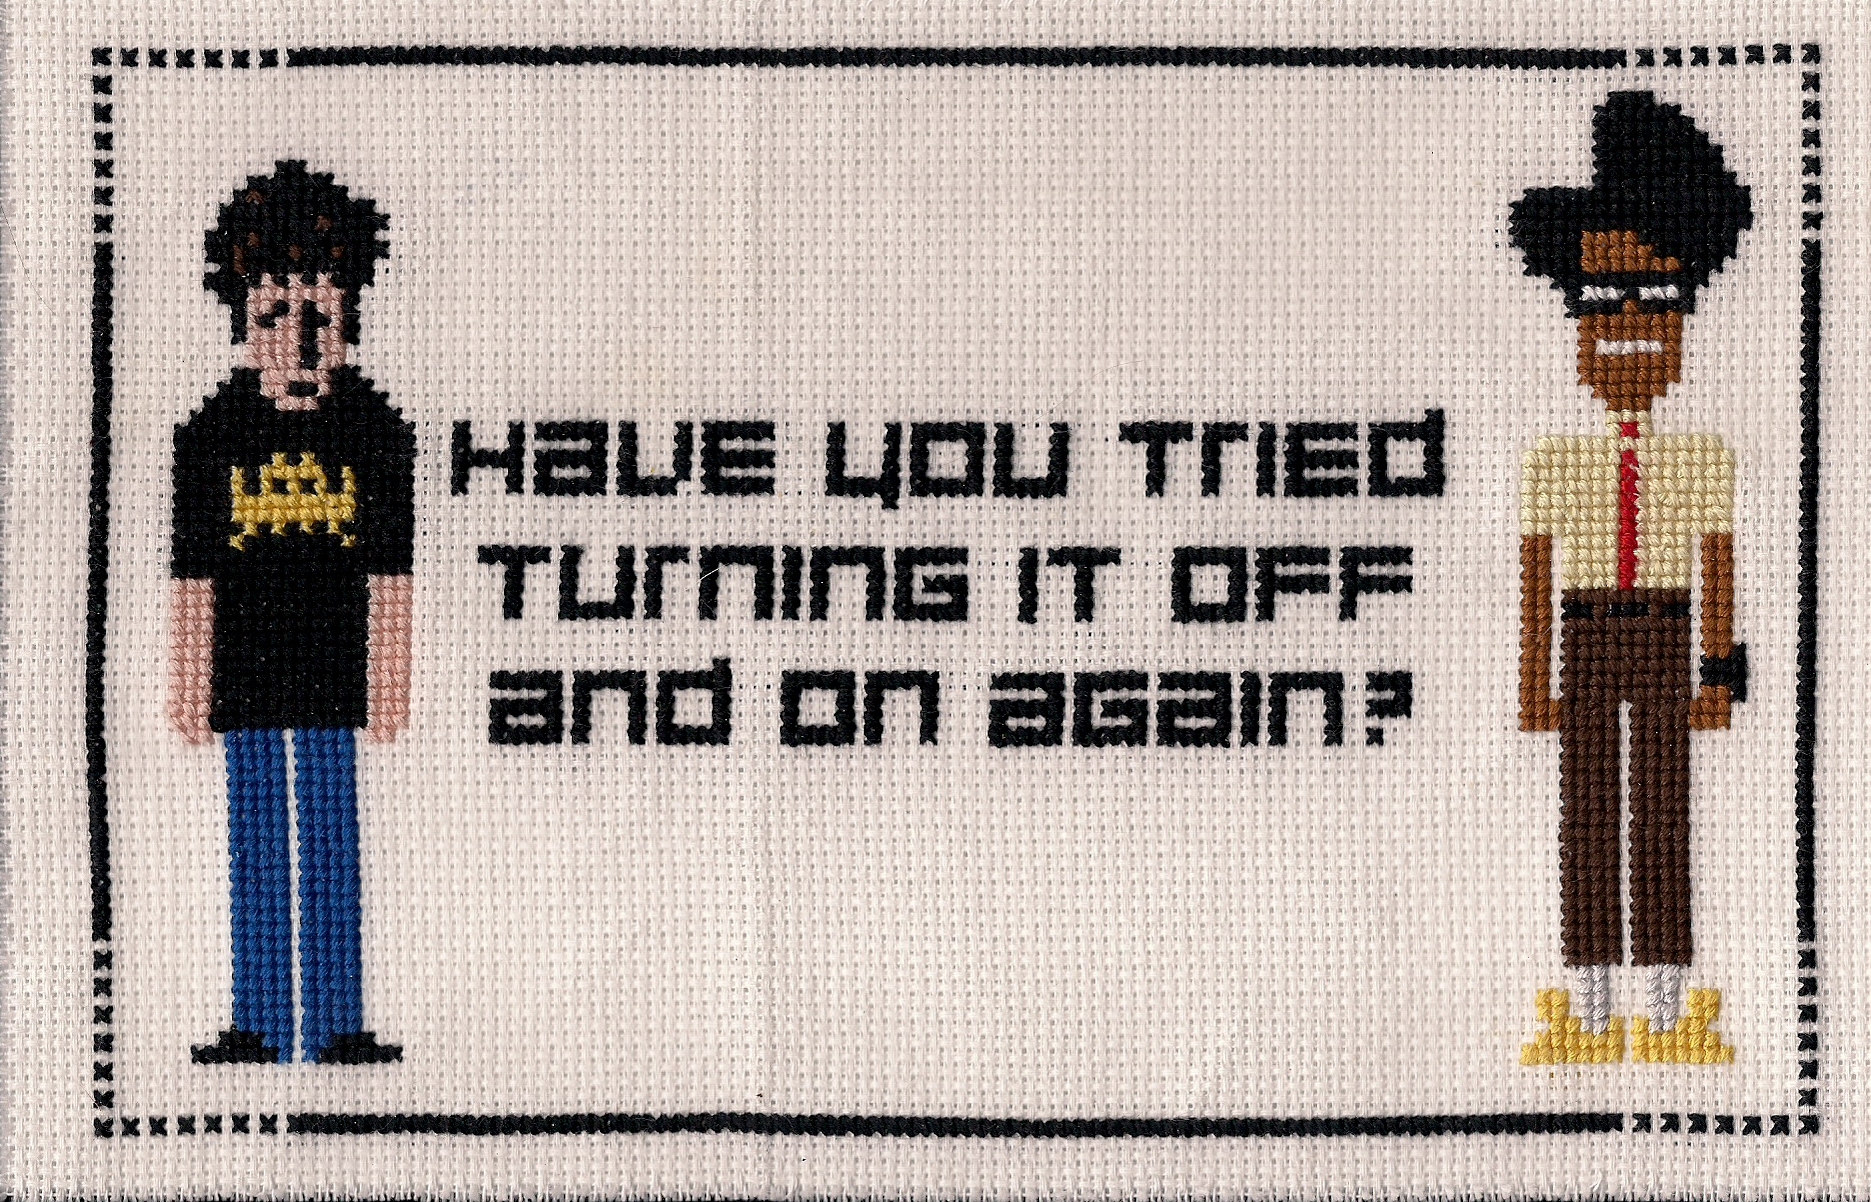 TV Show The IT Crowd Wallpaper